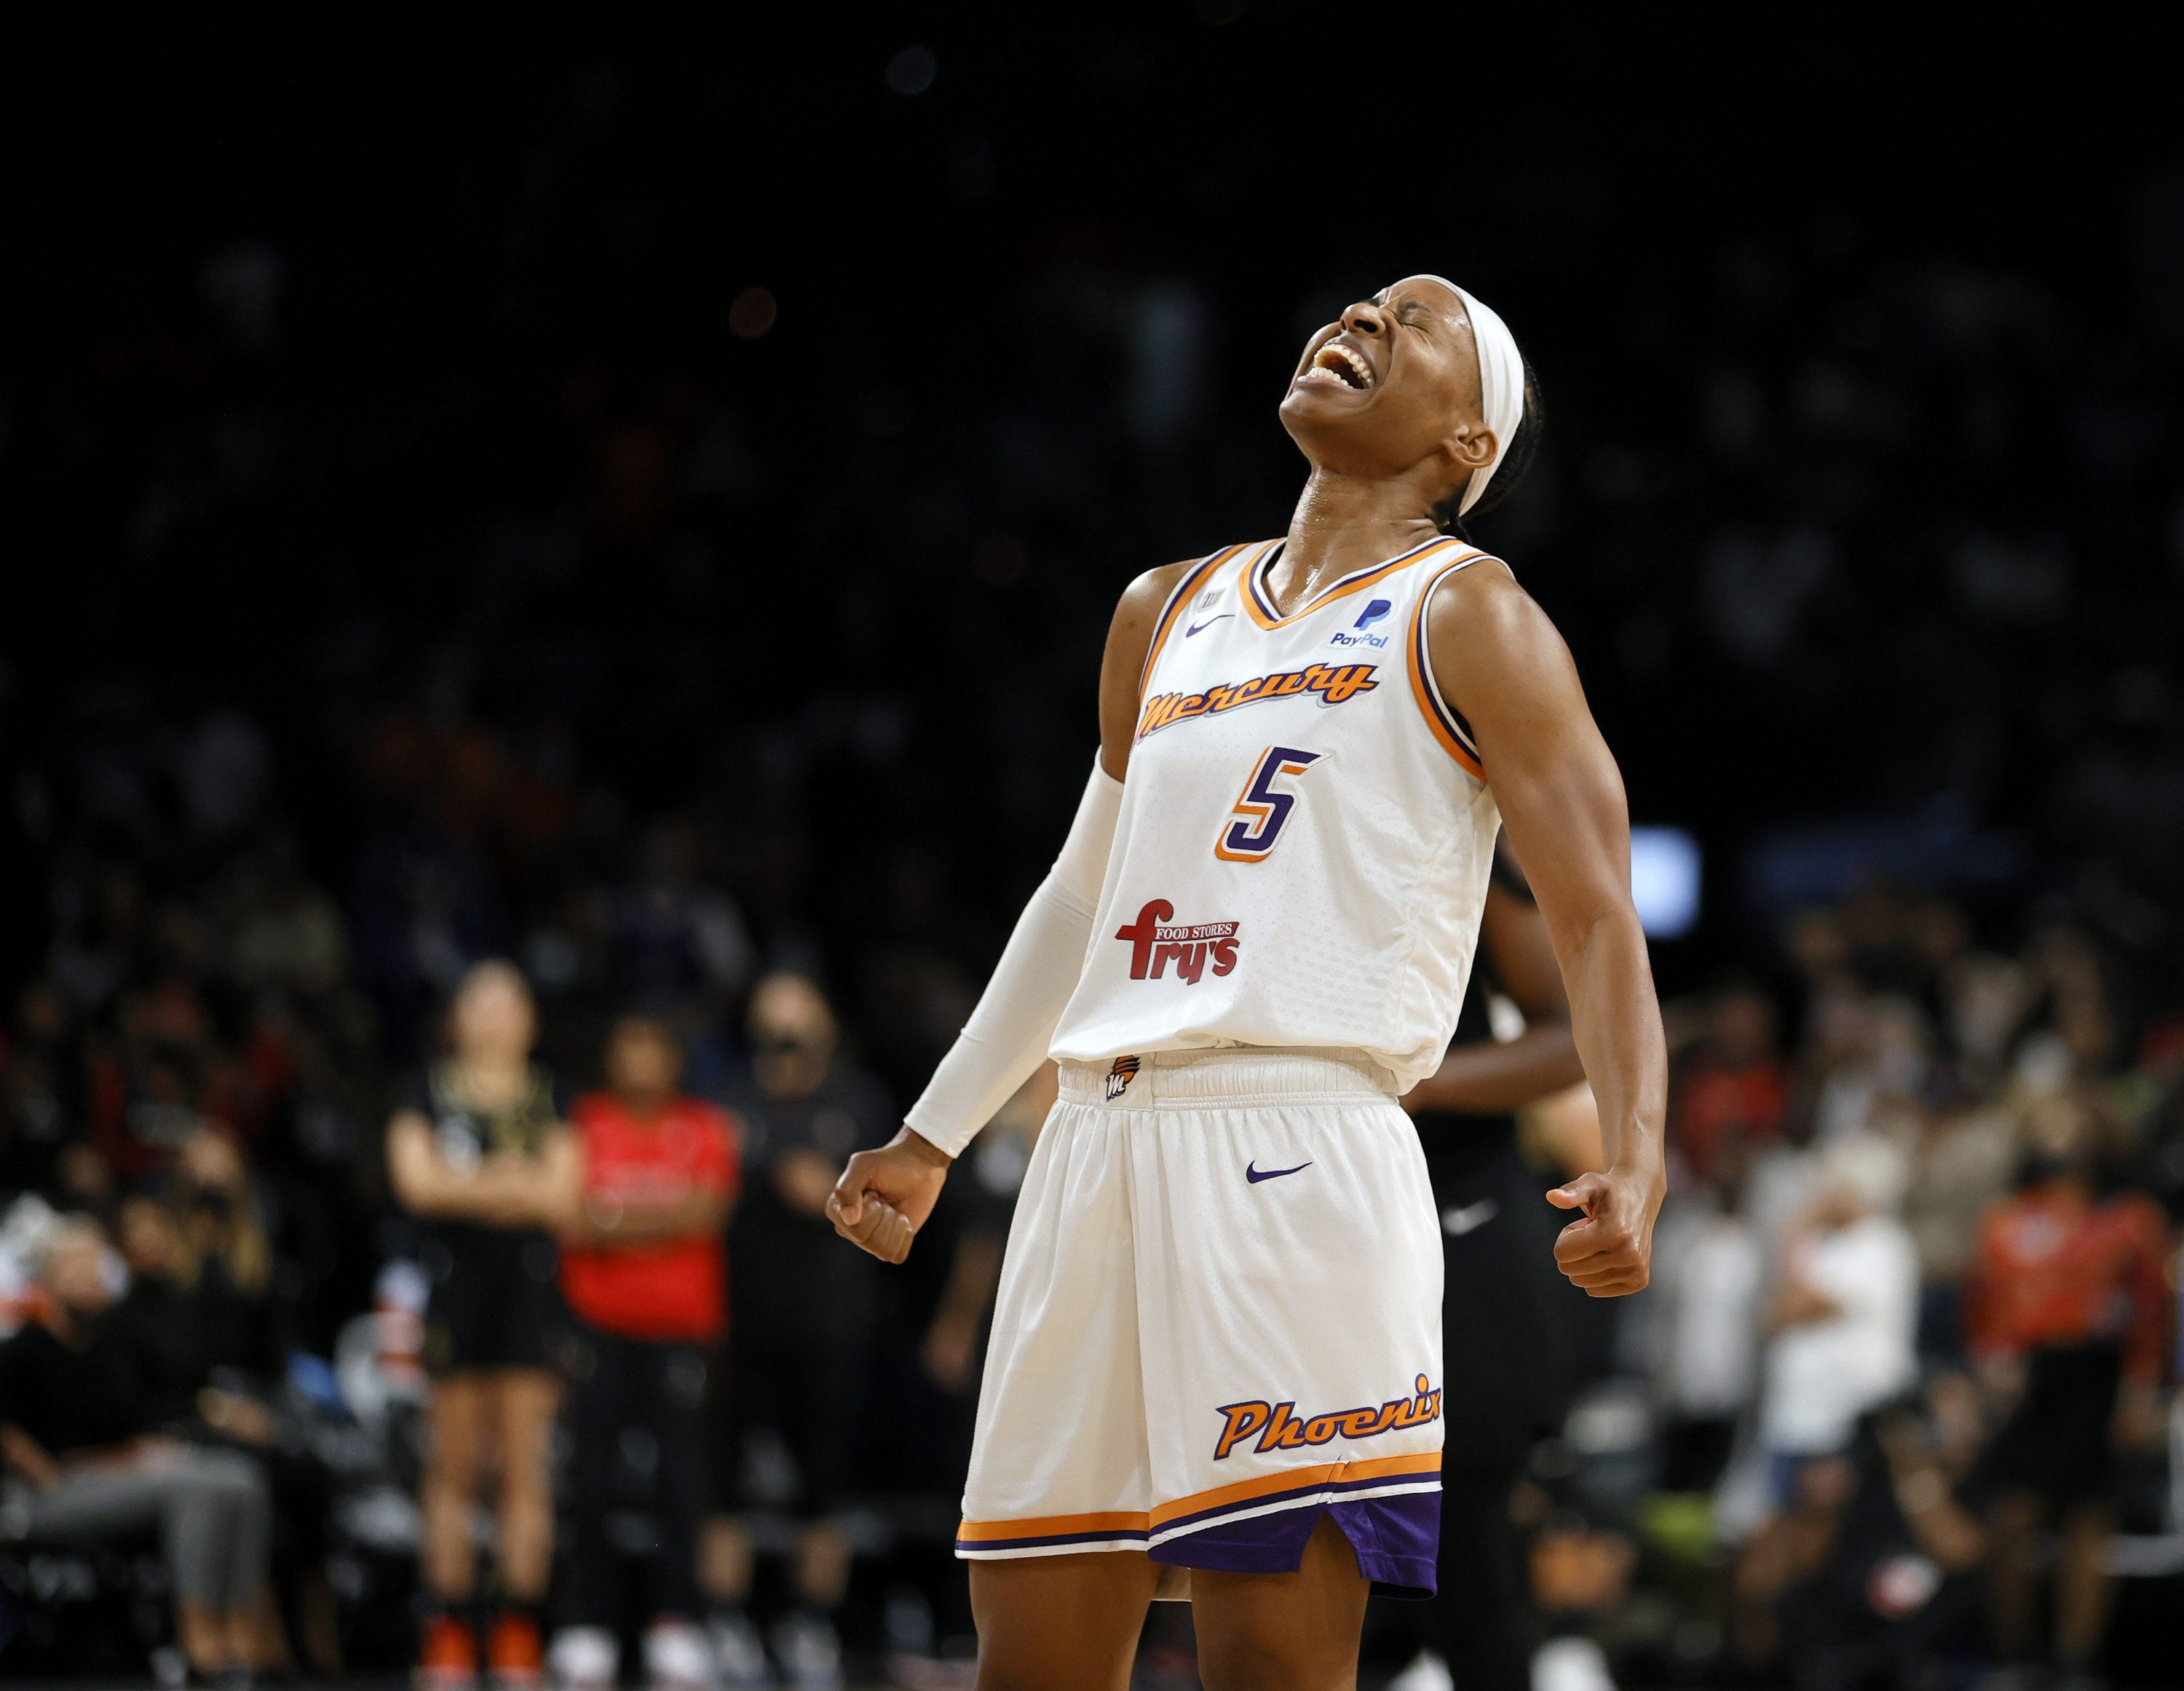 Shey Peddy #5 of the Phoenix Mercury celebrates as time expires in Game Five of the 2021 WNBA Playoffs semifinals against the Las Vegas Aces at Michelob ULTRA Arena on October 8, 2021 in Las Vegas, Nevada. The Mercury defeated the Aces 87-84 to win the series.